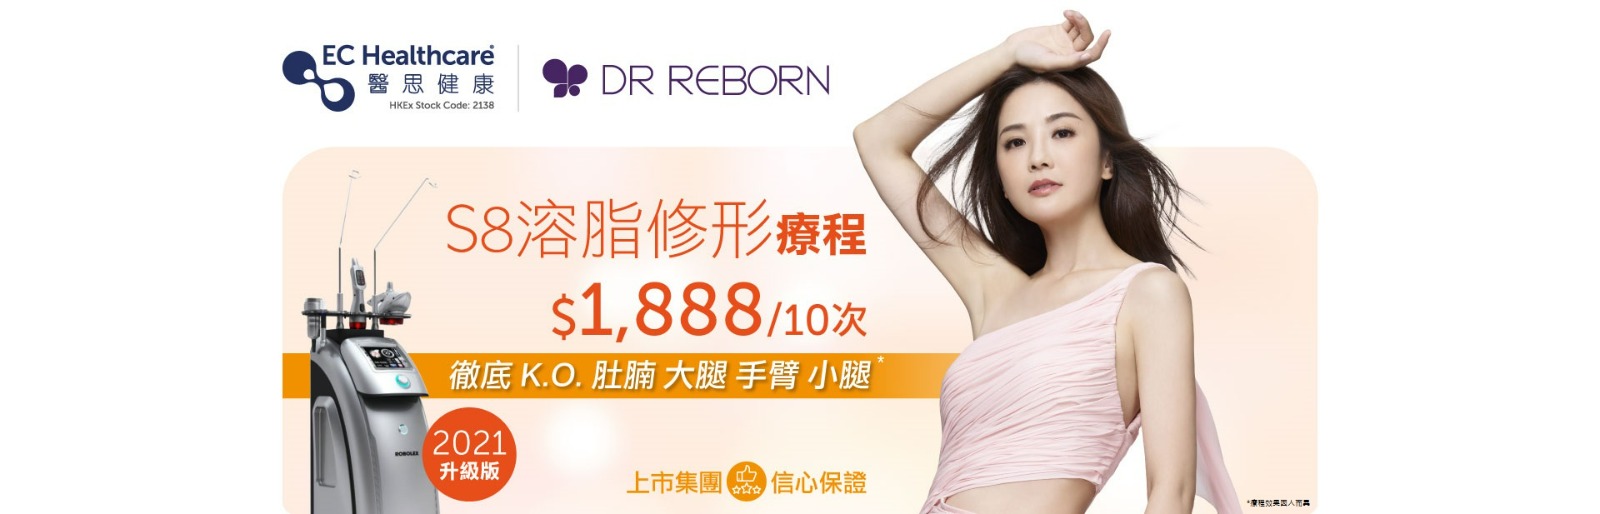 S8 Fat-melting and contouring treatment discounted price